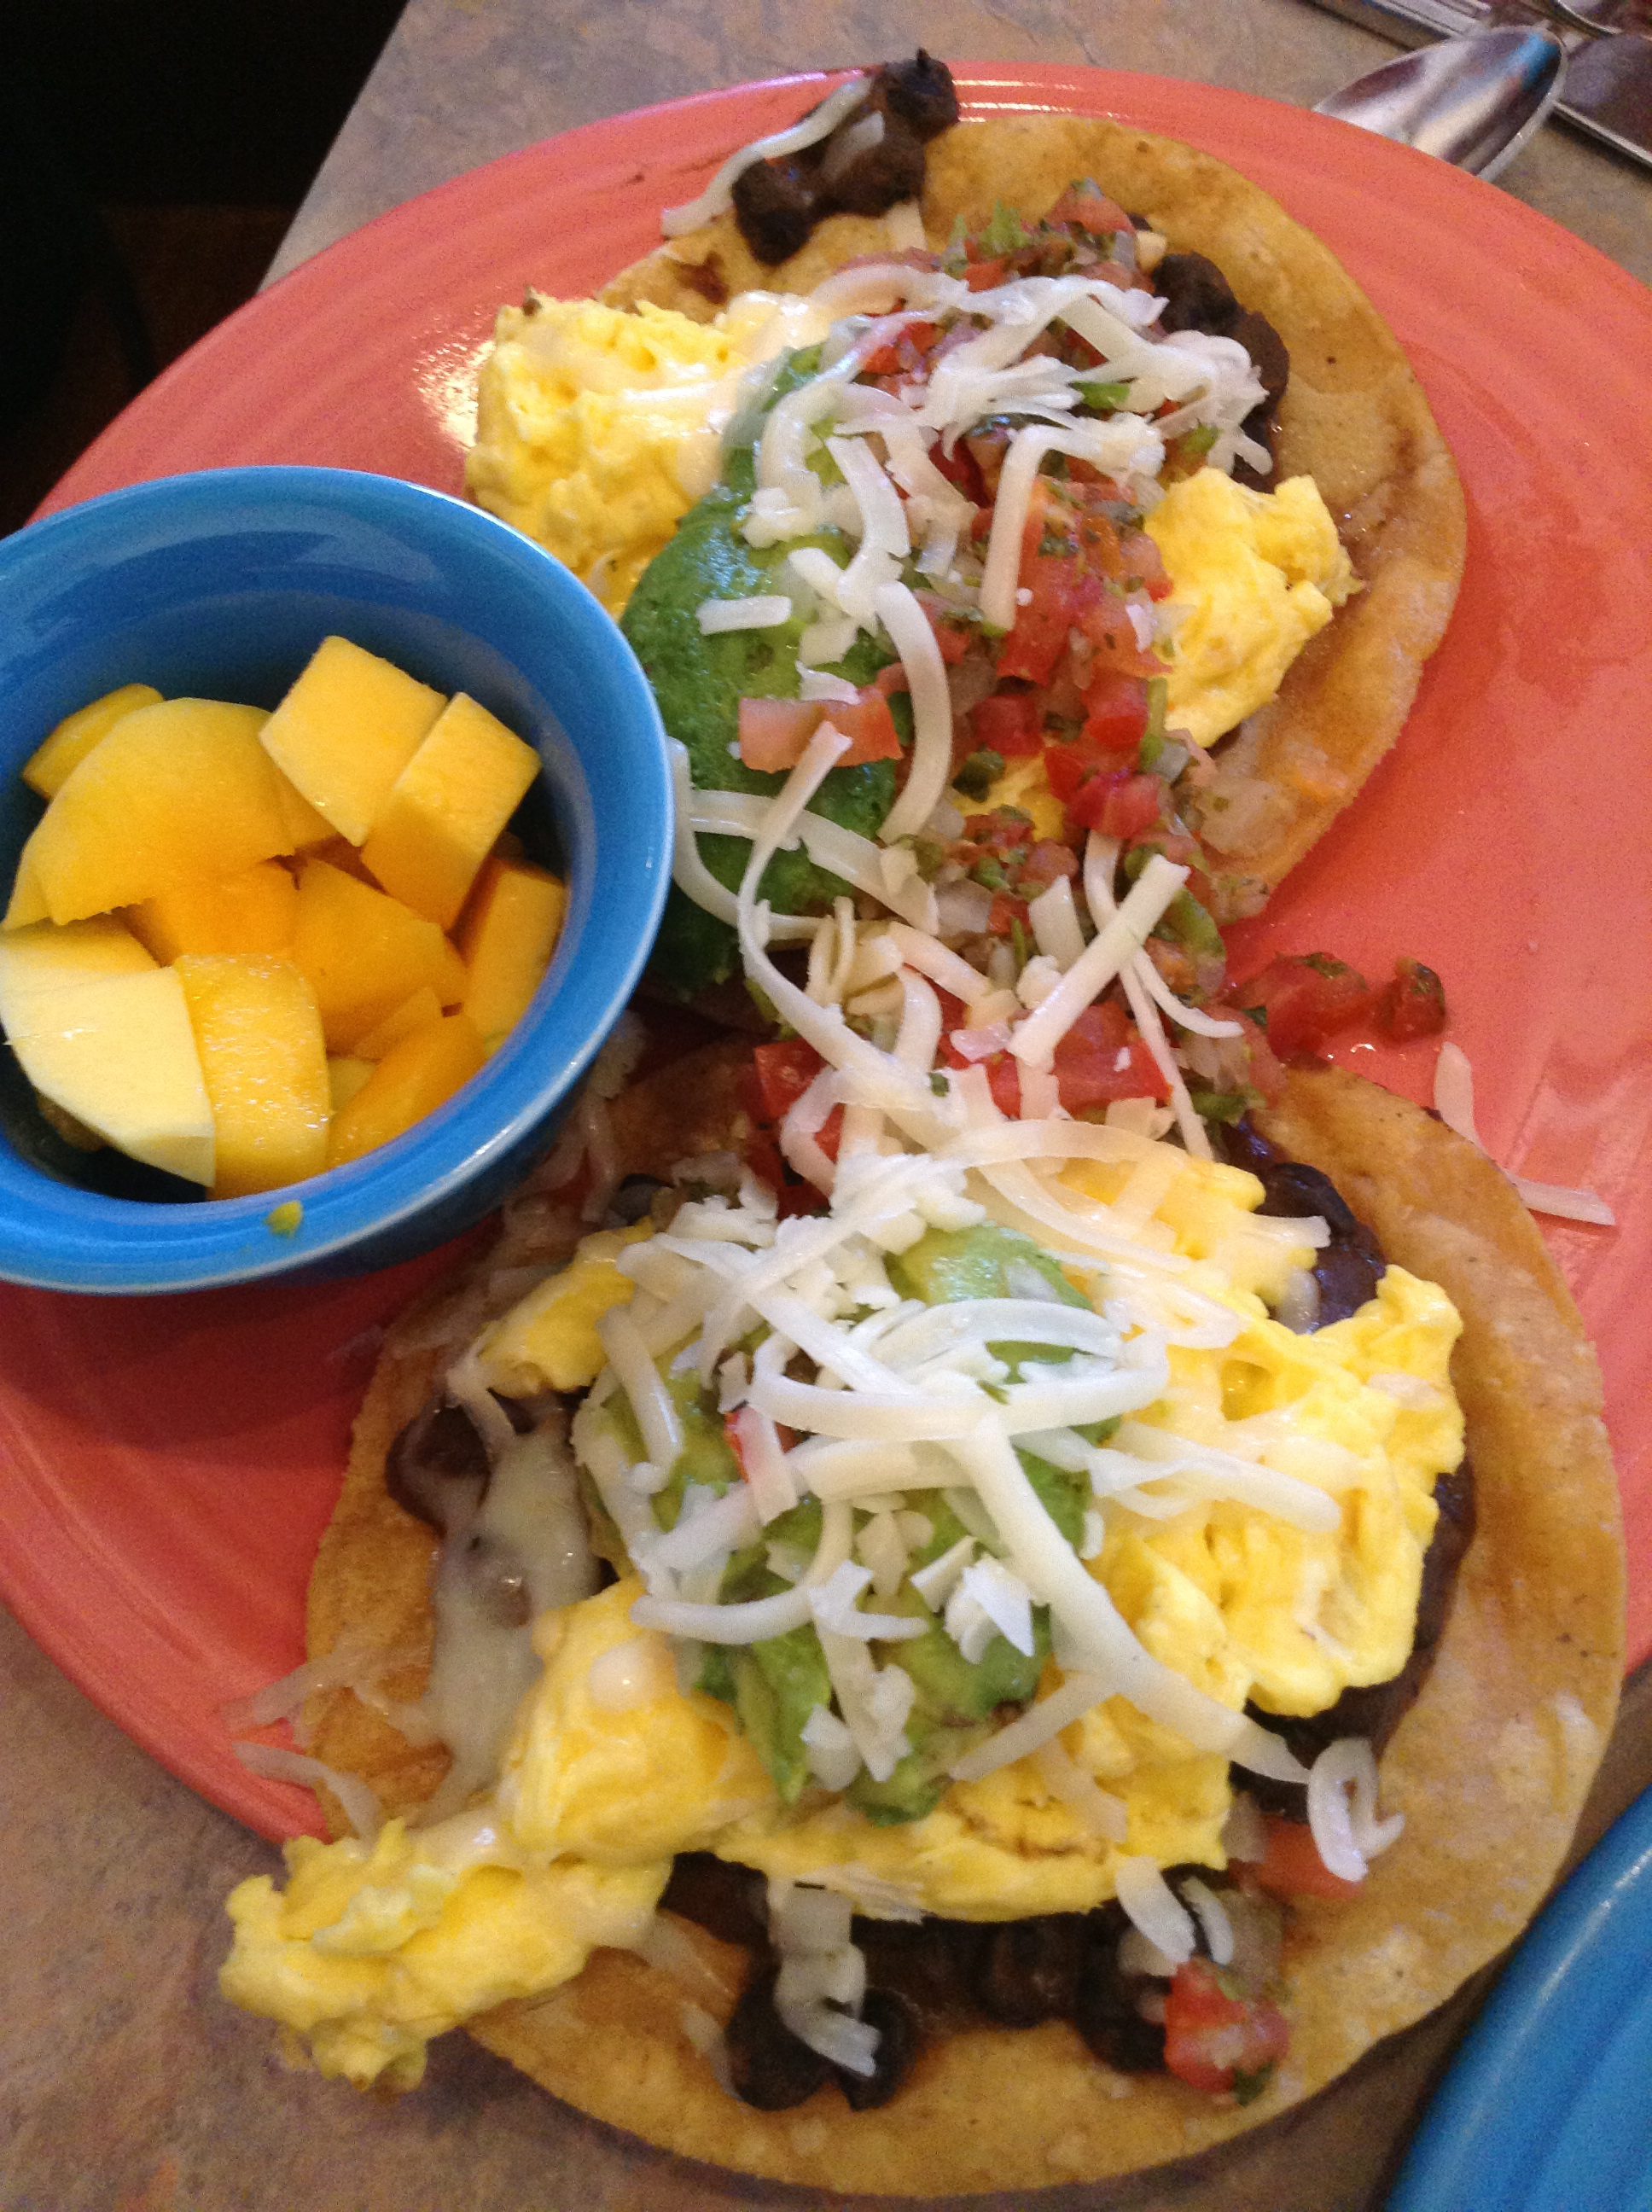 The Yucatan Tostada from Crest Cafe in San Diego